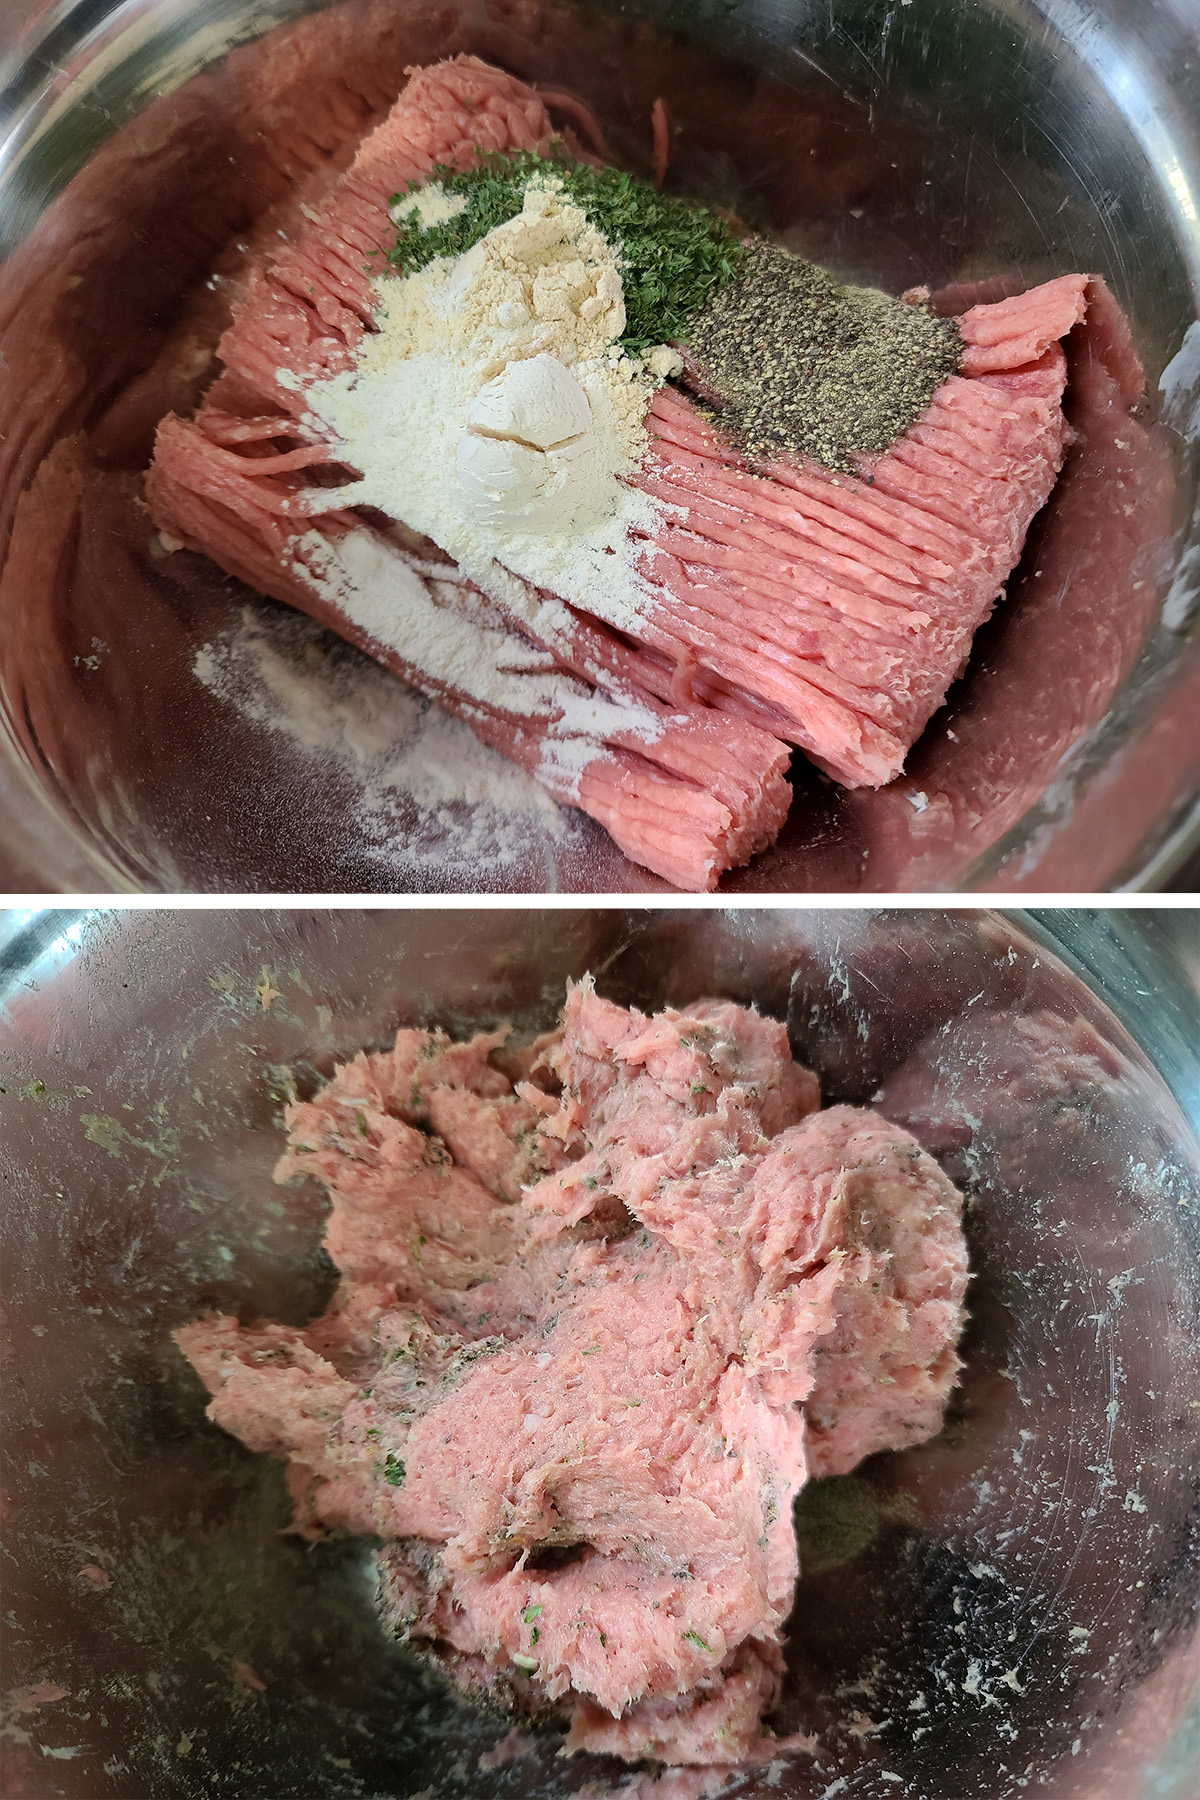 A 2 part image showing the ground chicken being seasoned and mixed together.